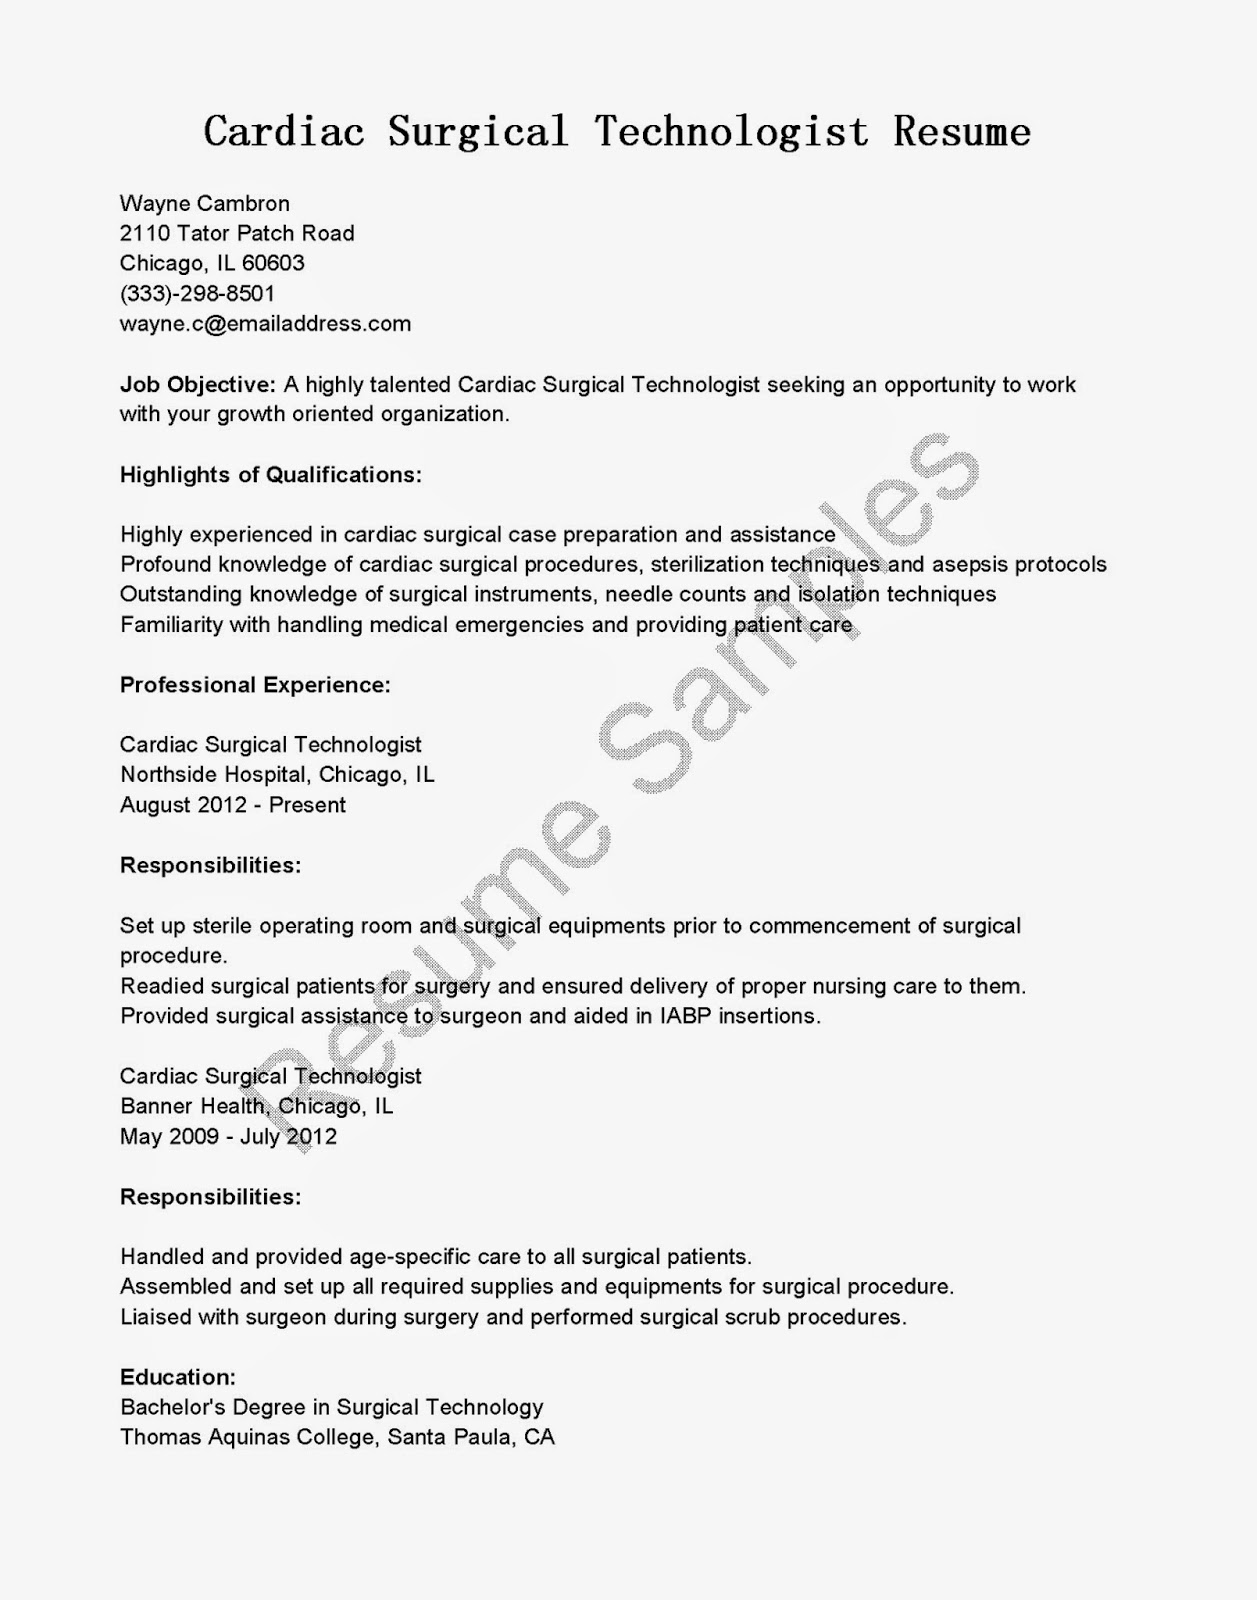 Certified surgical technologist resume template